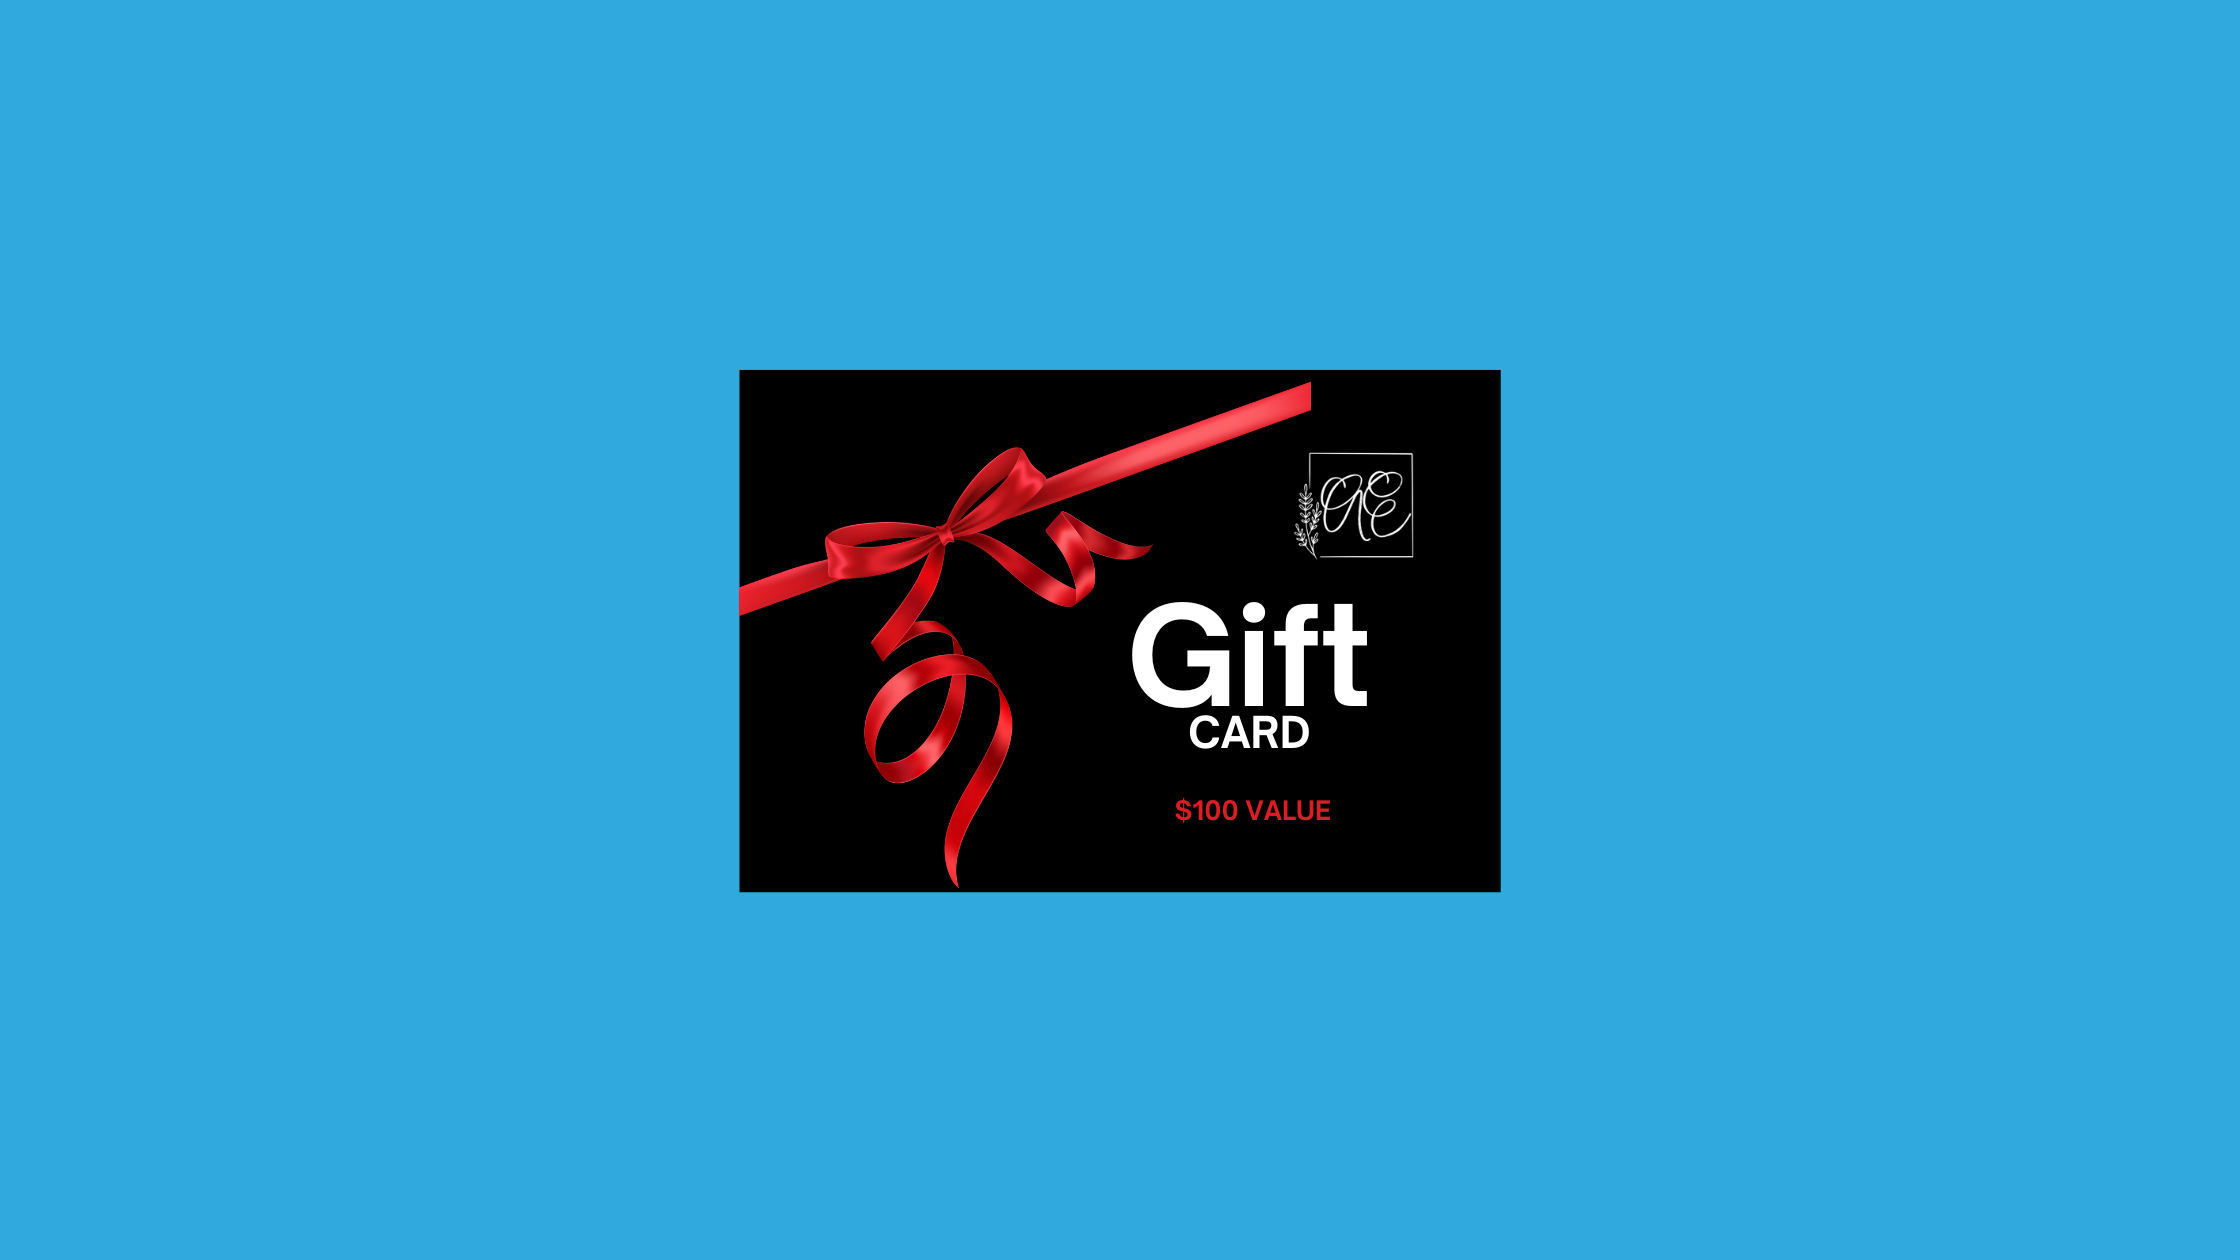 Affirm Gift Card: The Perfect Way to Spread Positivity